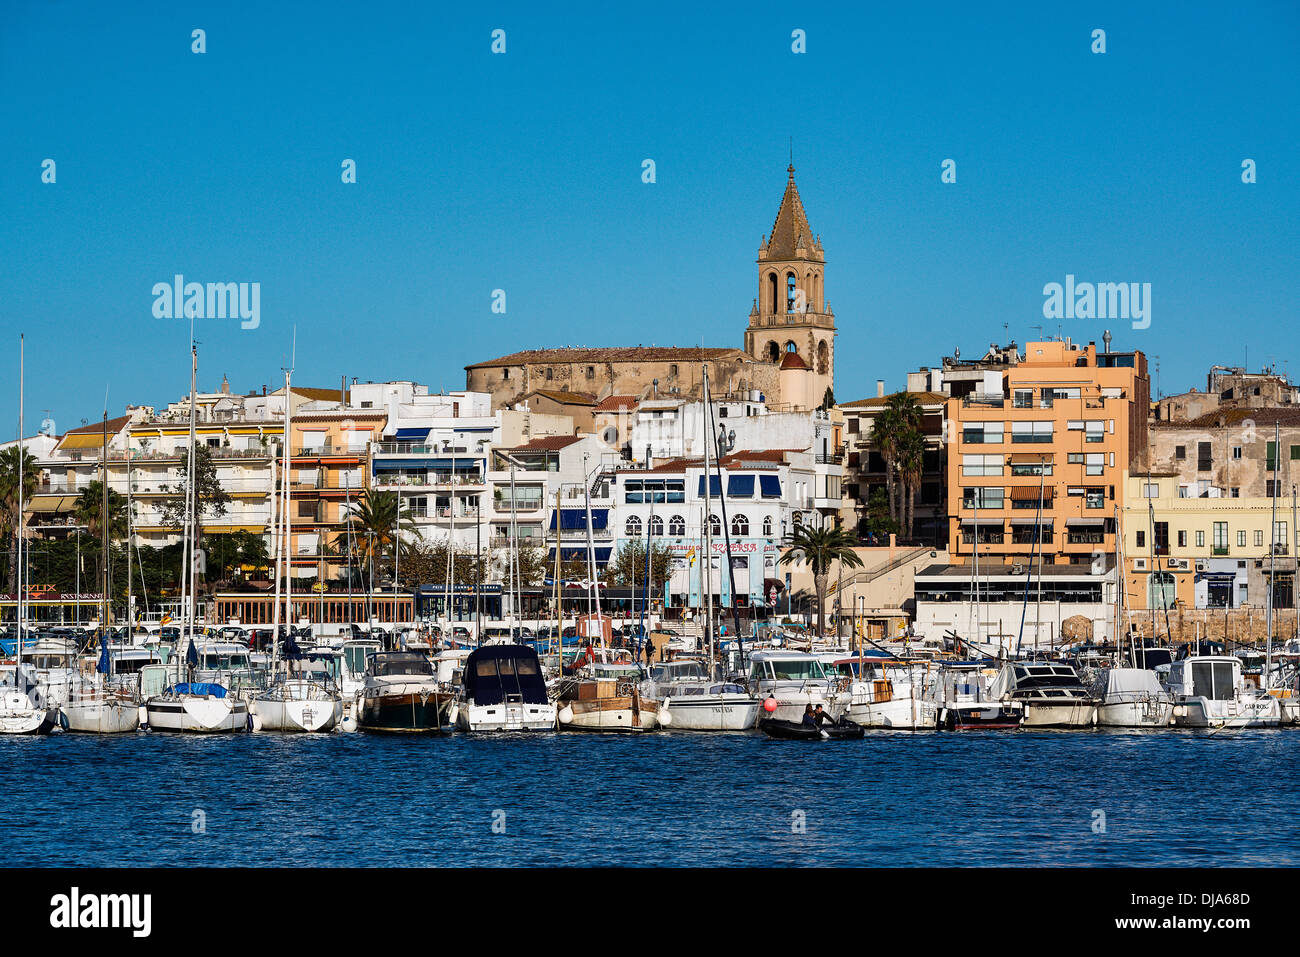 Overview of the harbor of Palamos, Spain Stock Photo